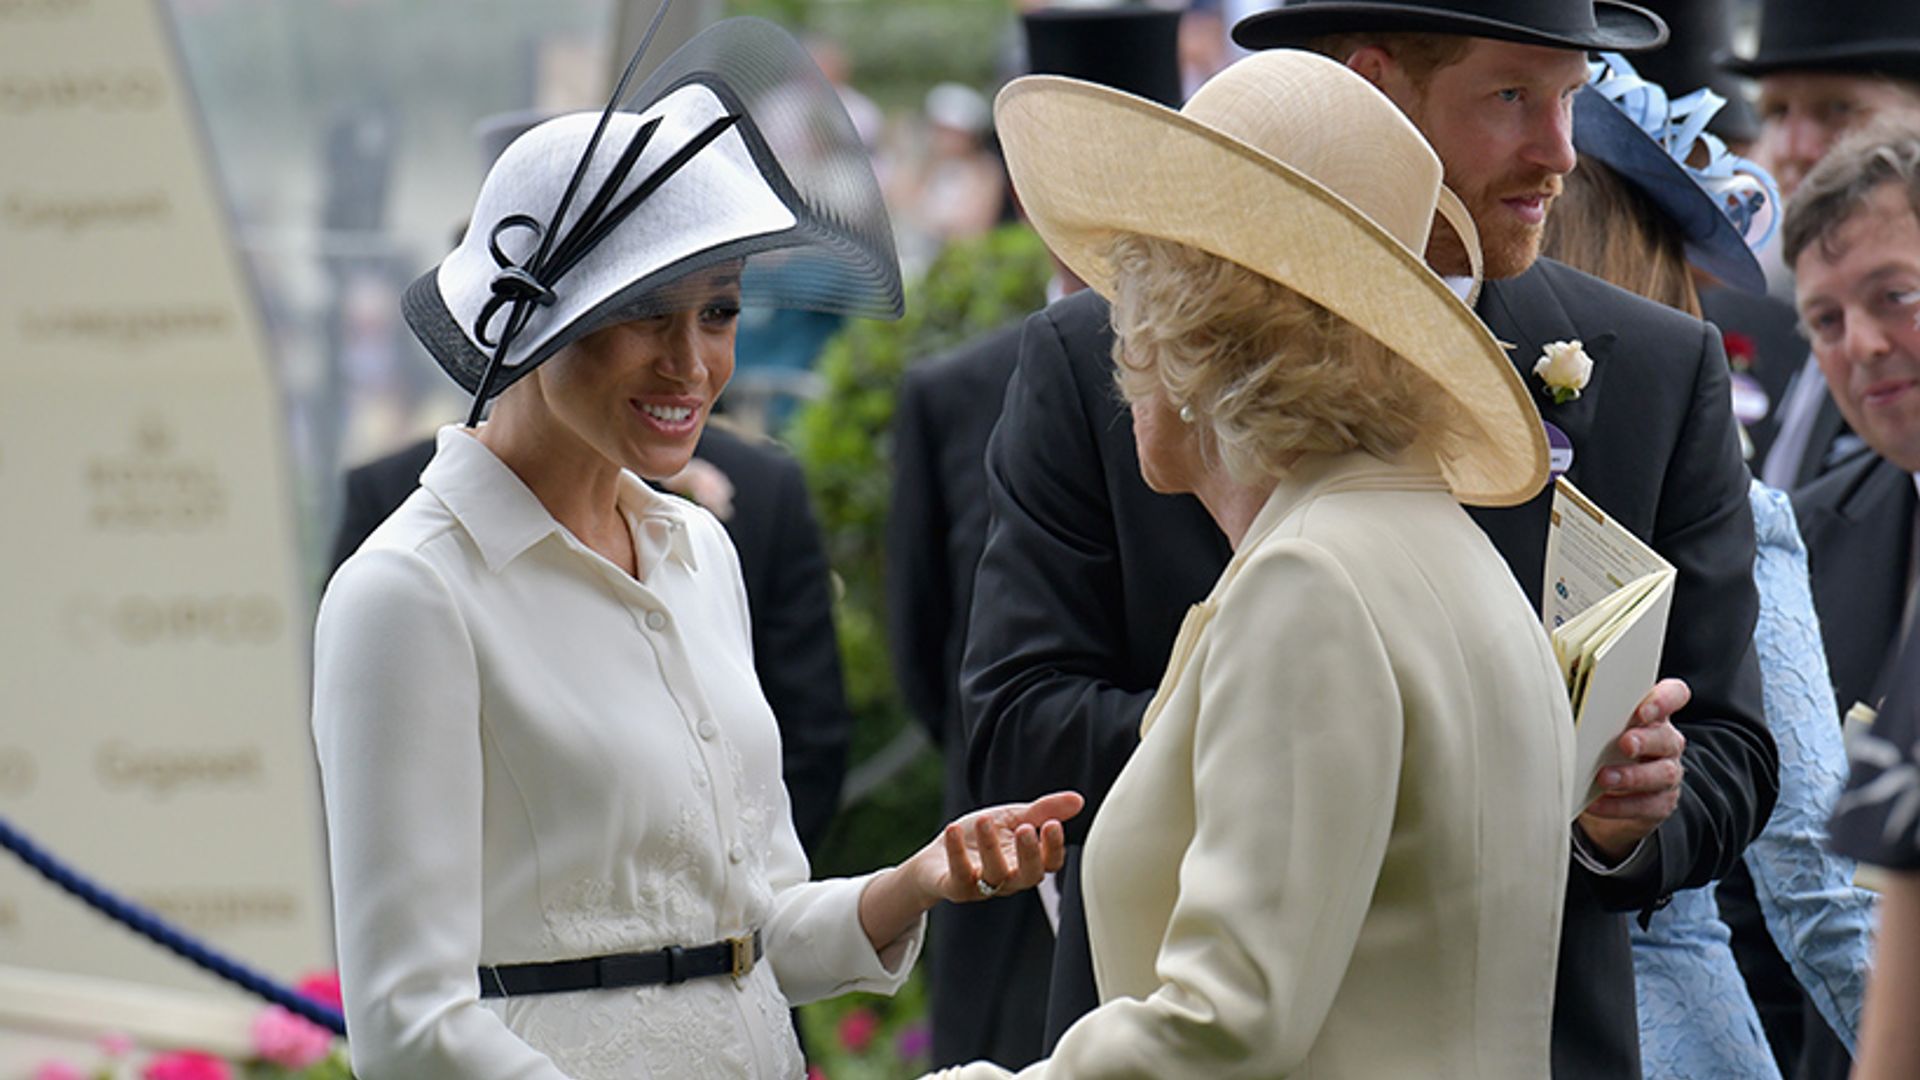 Camilla Parker Bowles and MEGHAN markle